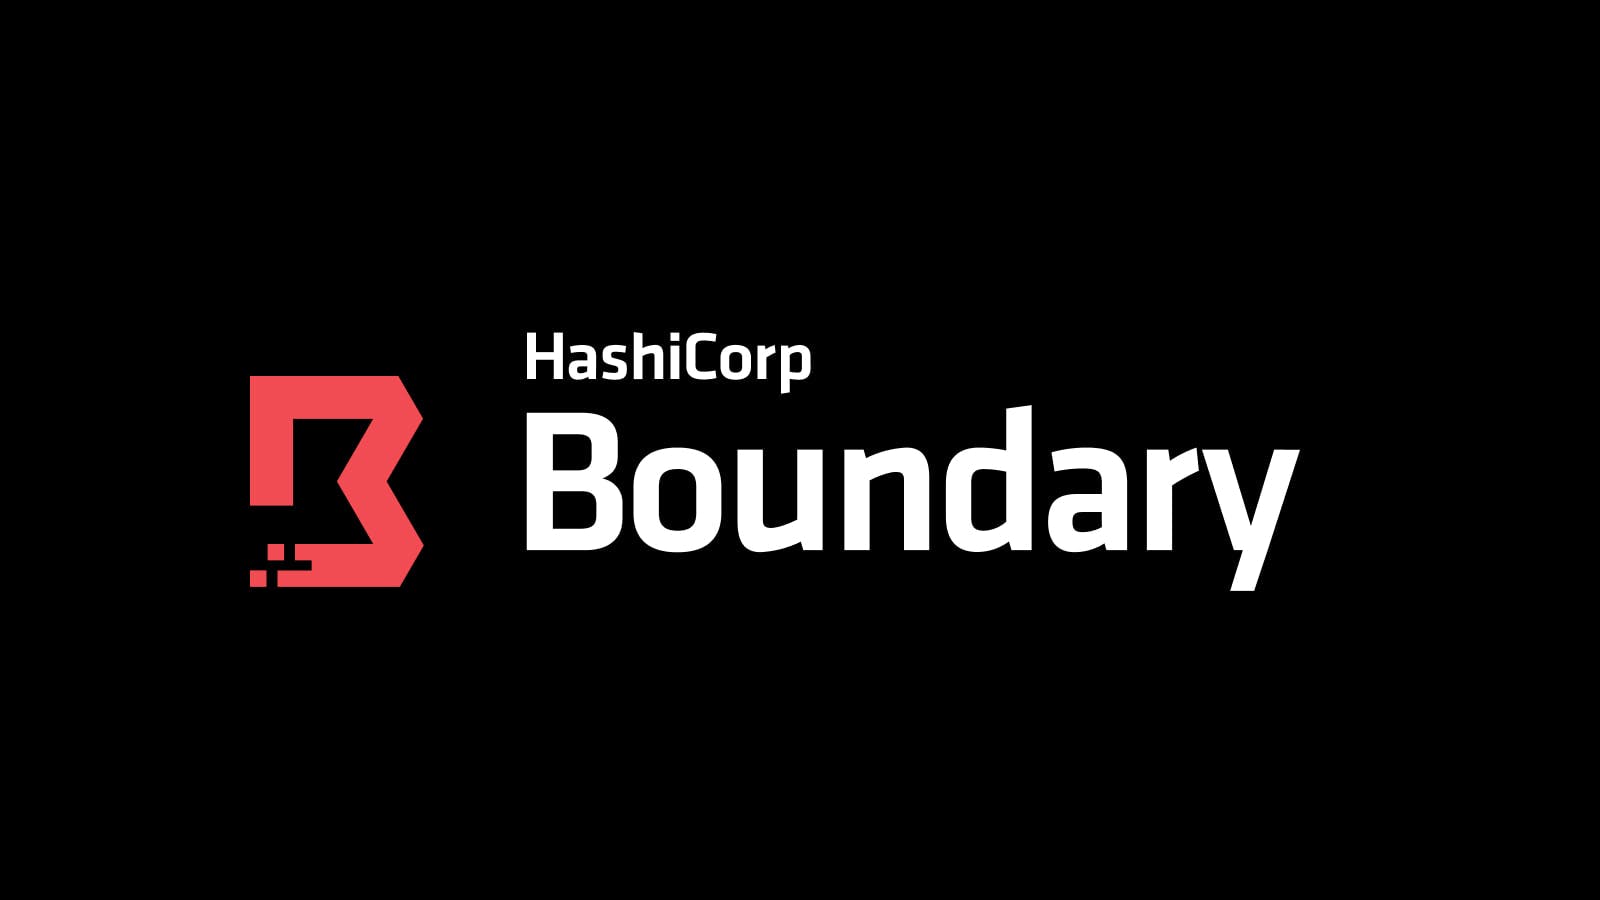 Boundary 0.15 adds new storage policies and desktop/CLI features